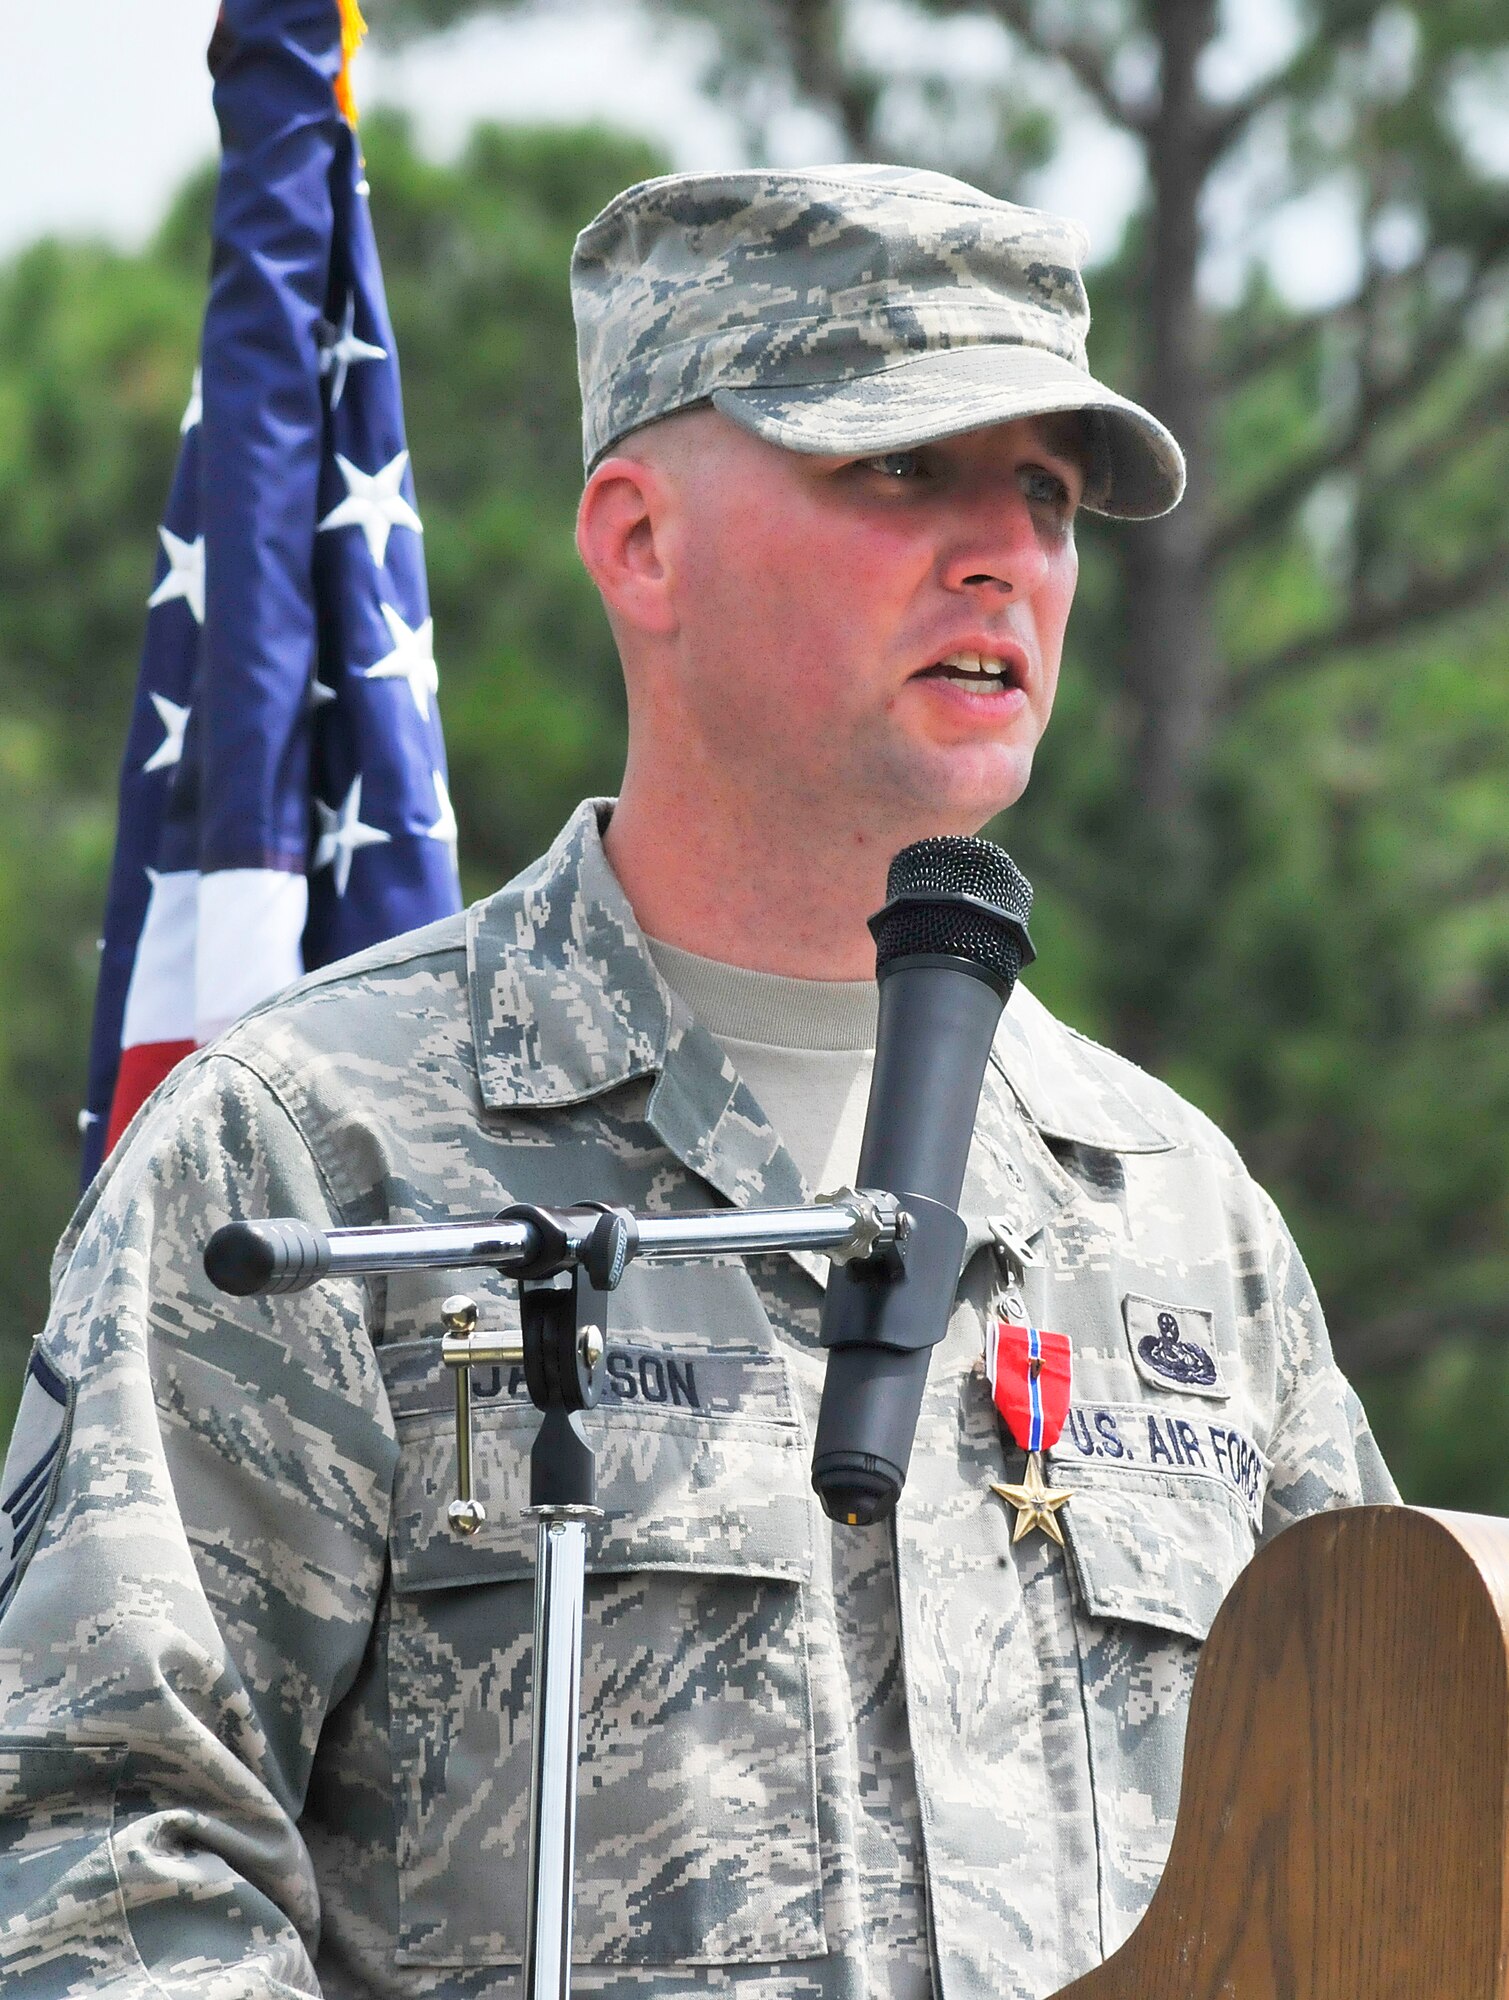 Master Sgt. Gene B. Jameson, III, was awarded the Bronze Star Medal with Valor in a ceremony August 23. Sgt. Jameson received the medal for heroism while deployed to Bagram Airfield, Afghanistan. (U. S. Air Force photo/Sue Sapp)